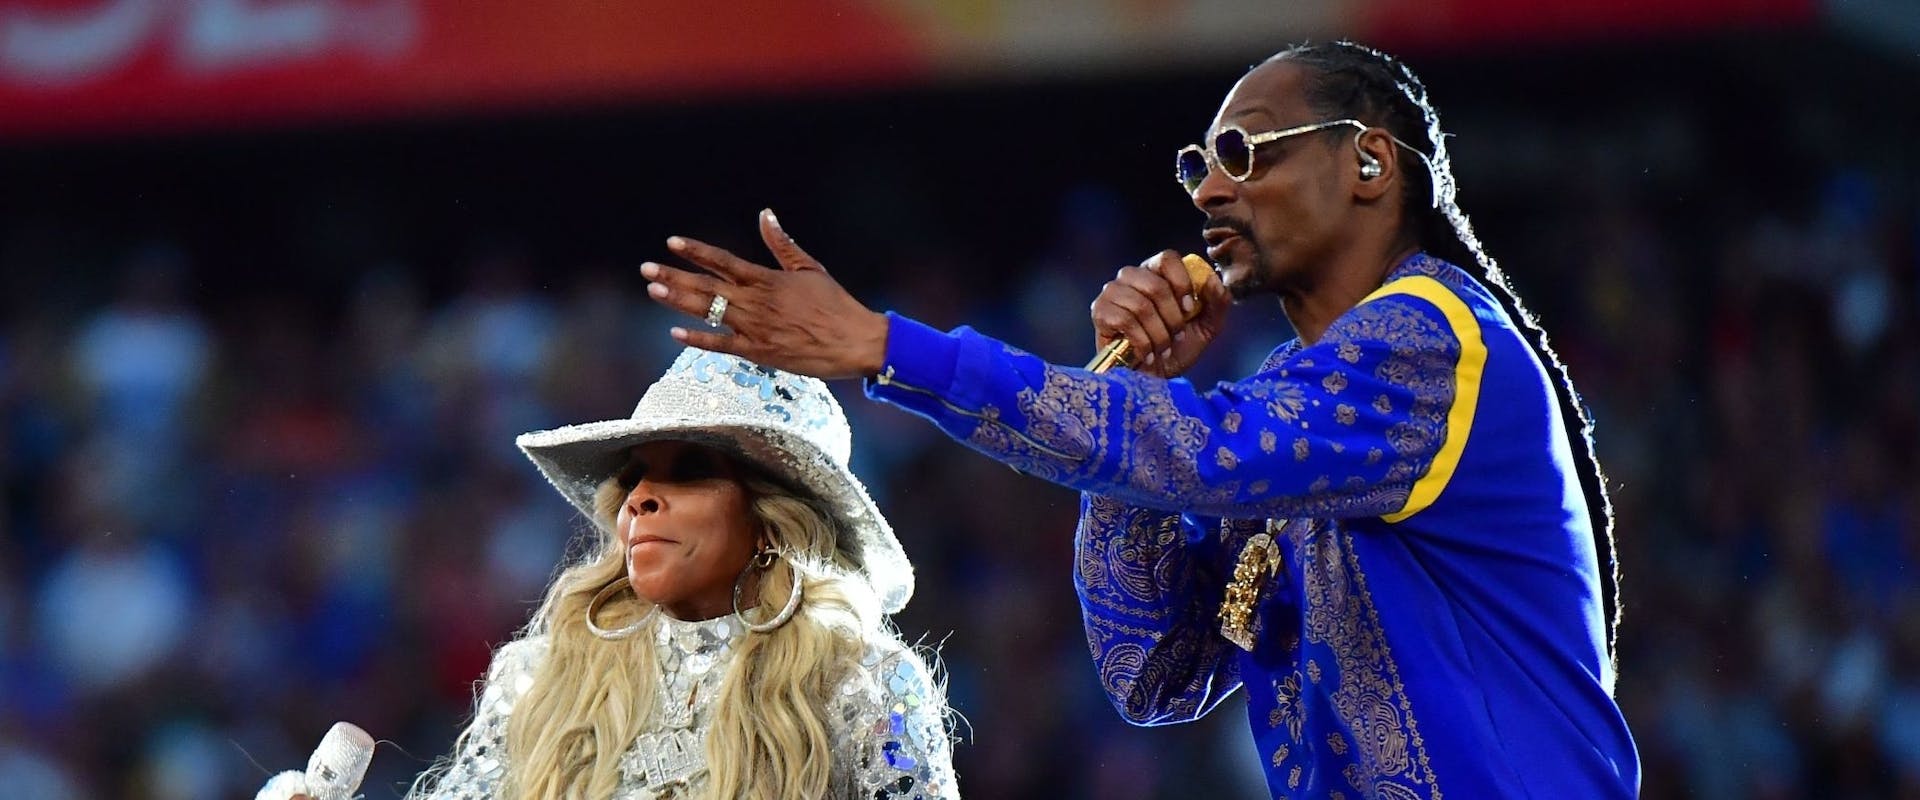 Super Bowl Halftime Performance Breaks Records and Will Likely